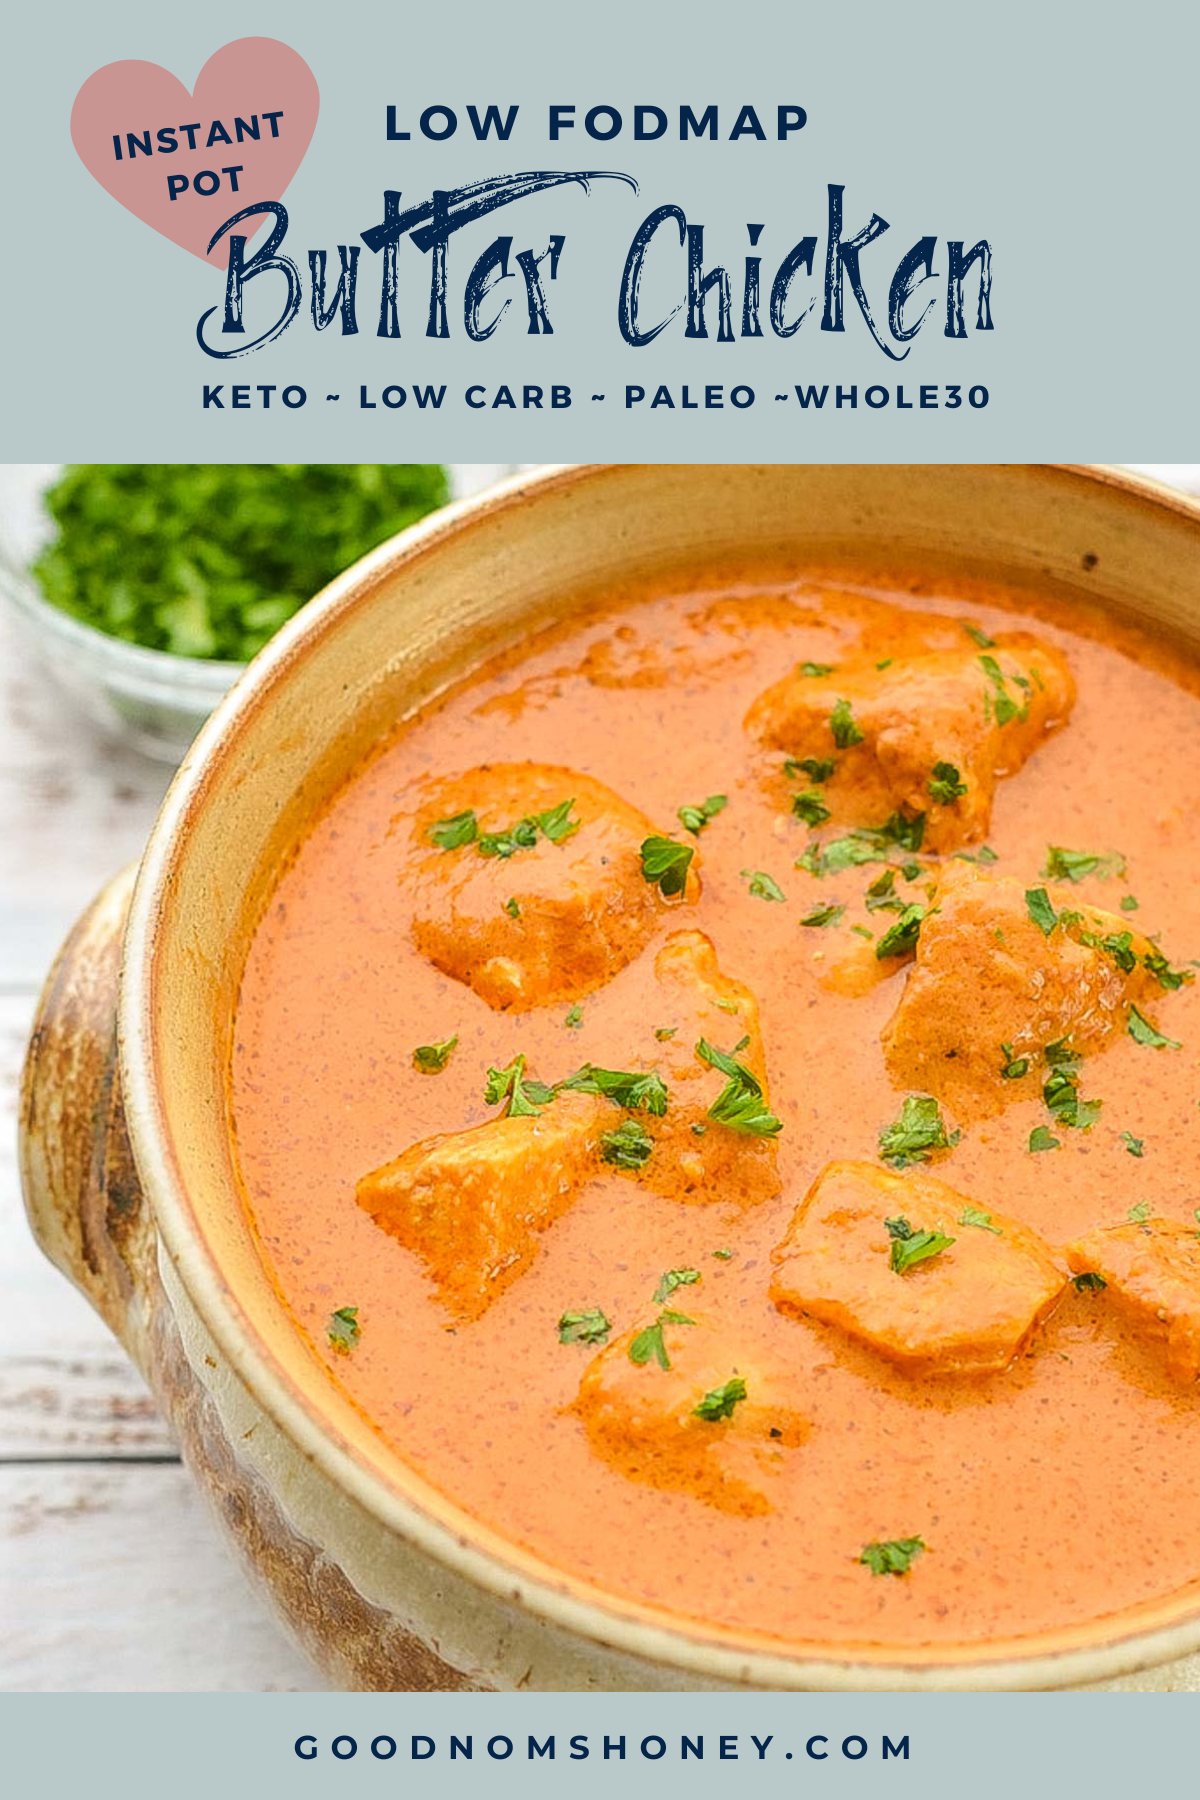 pinterest image with low fodmap instant pot butter chicken keto low carb paleo whole30 at the top and goodnomshoney.com at the bottom